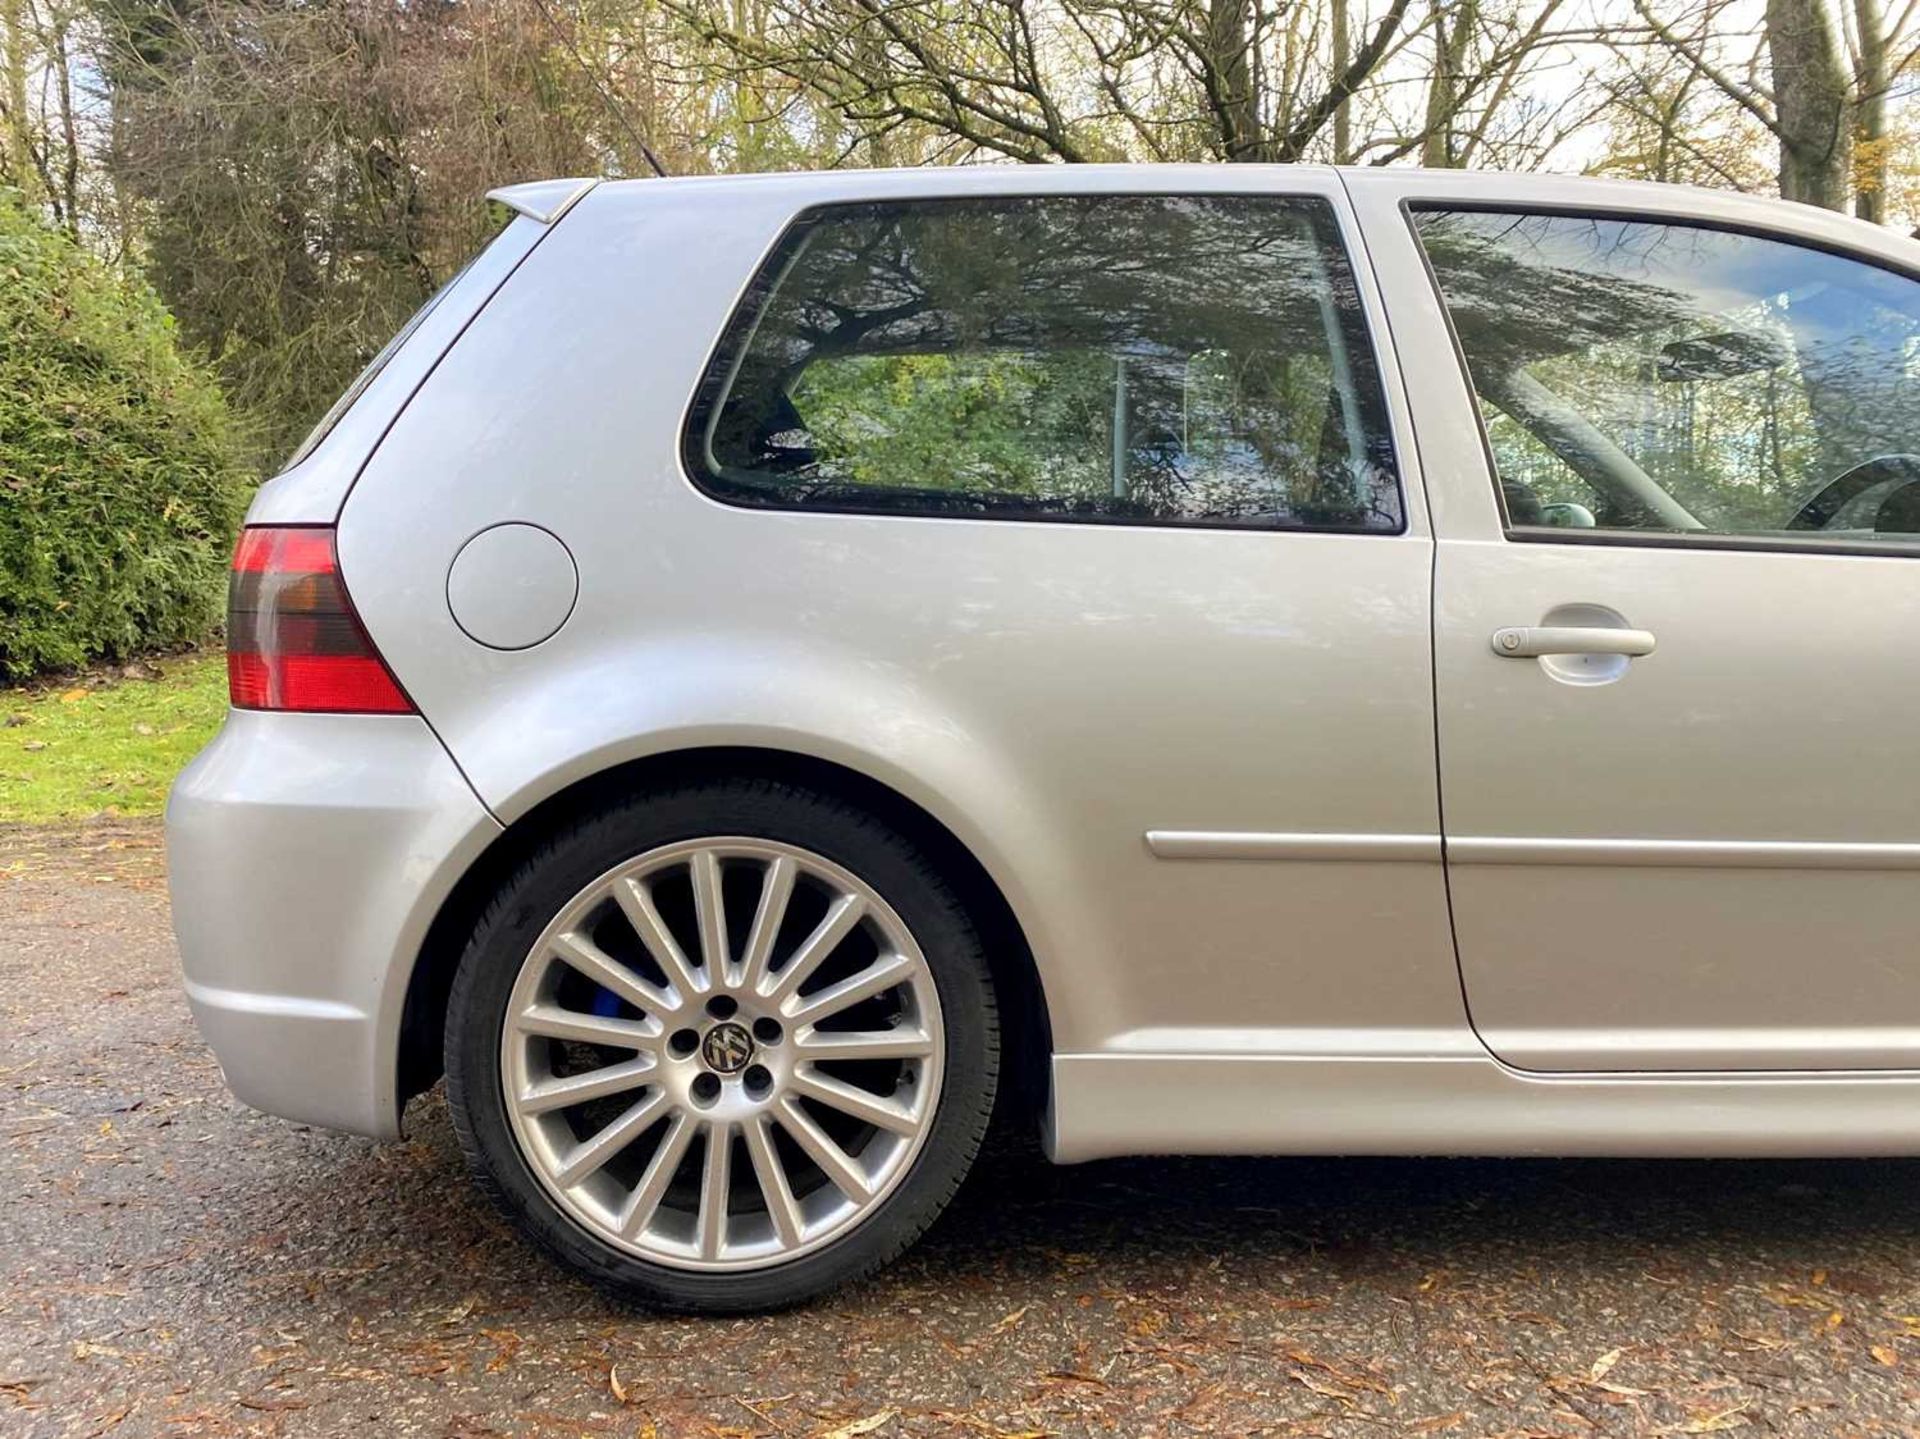 2003 Volkswagen Golf R32 In current ownership for sixteen years - Image 67 of 94